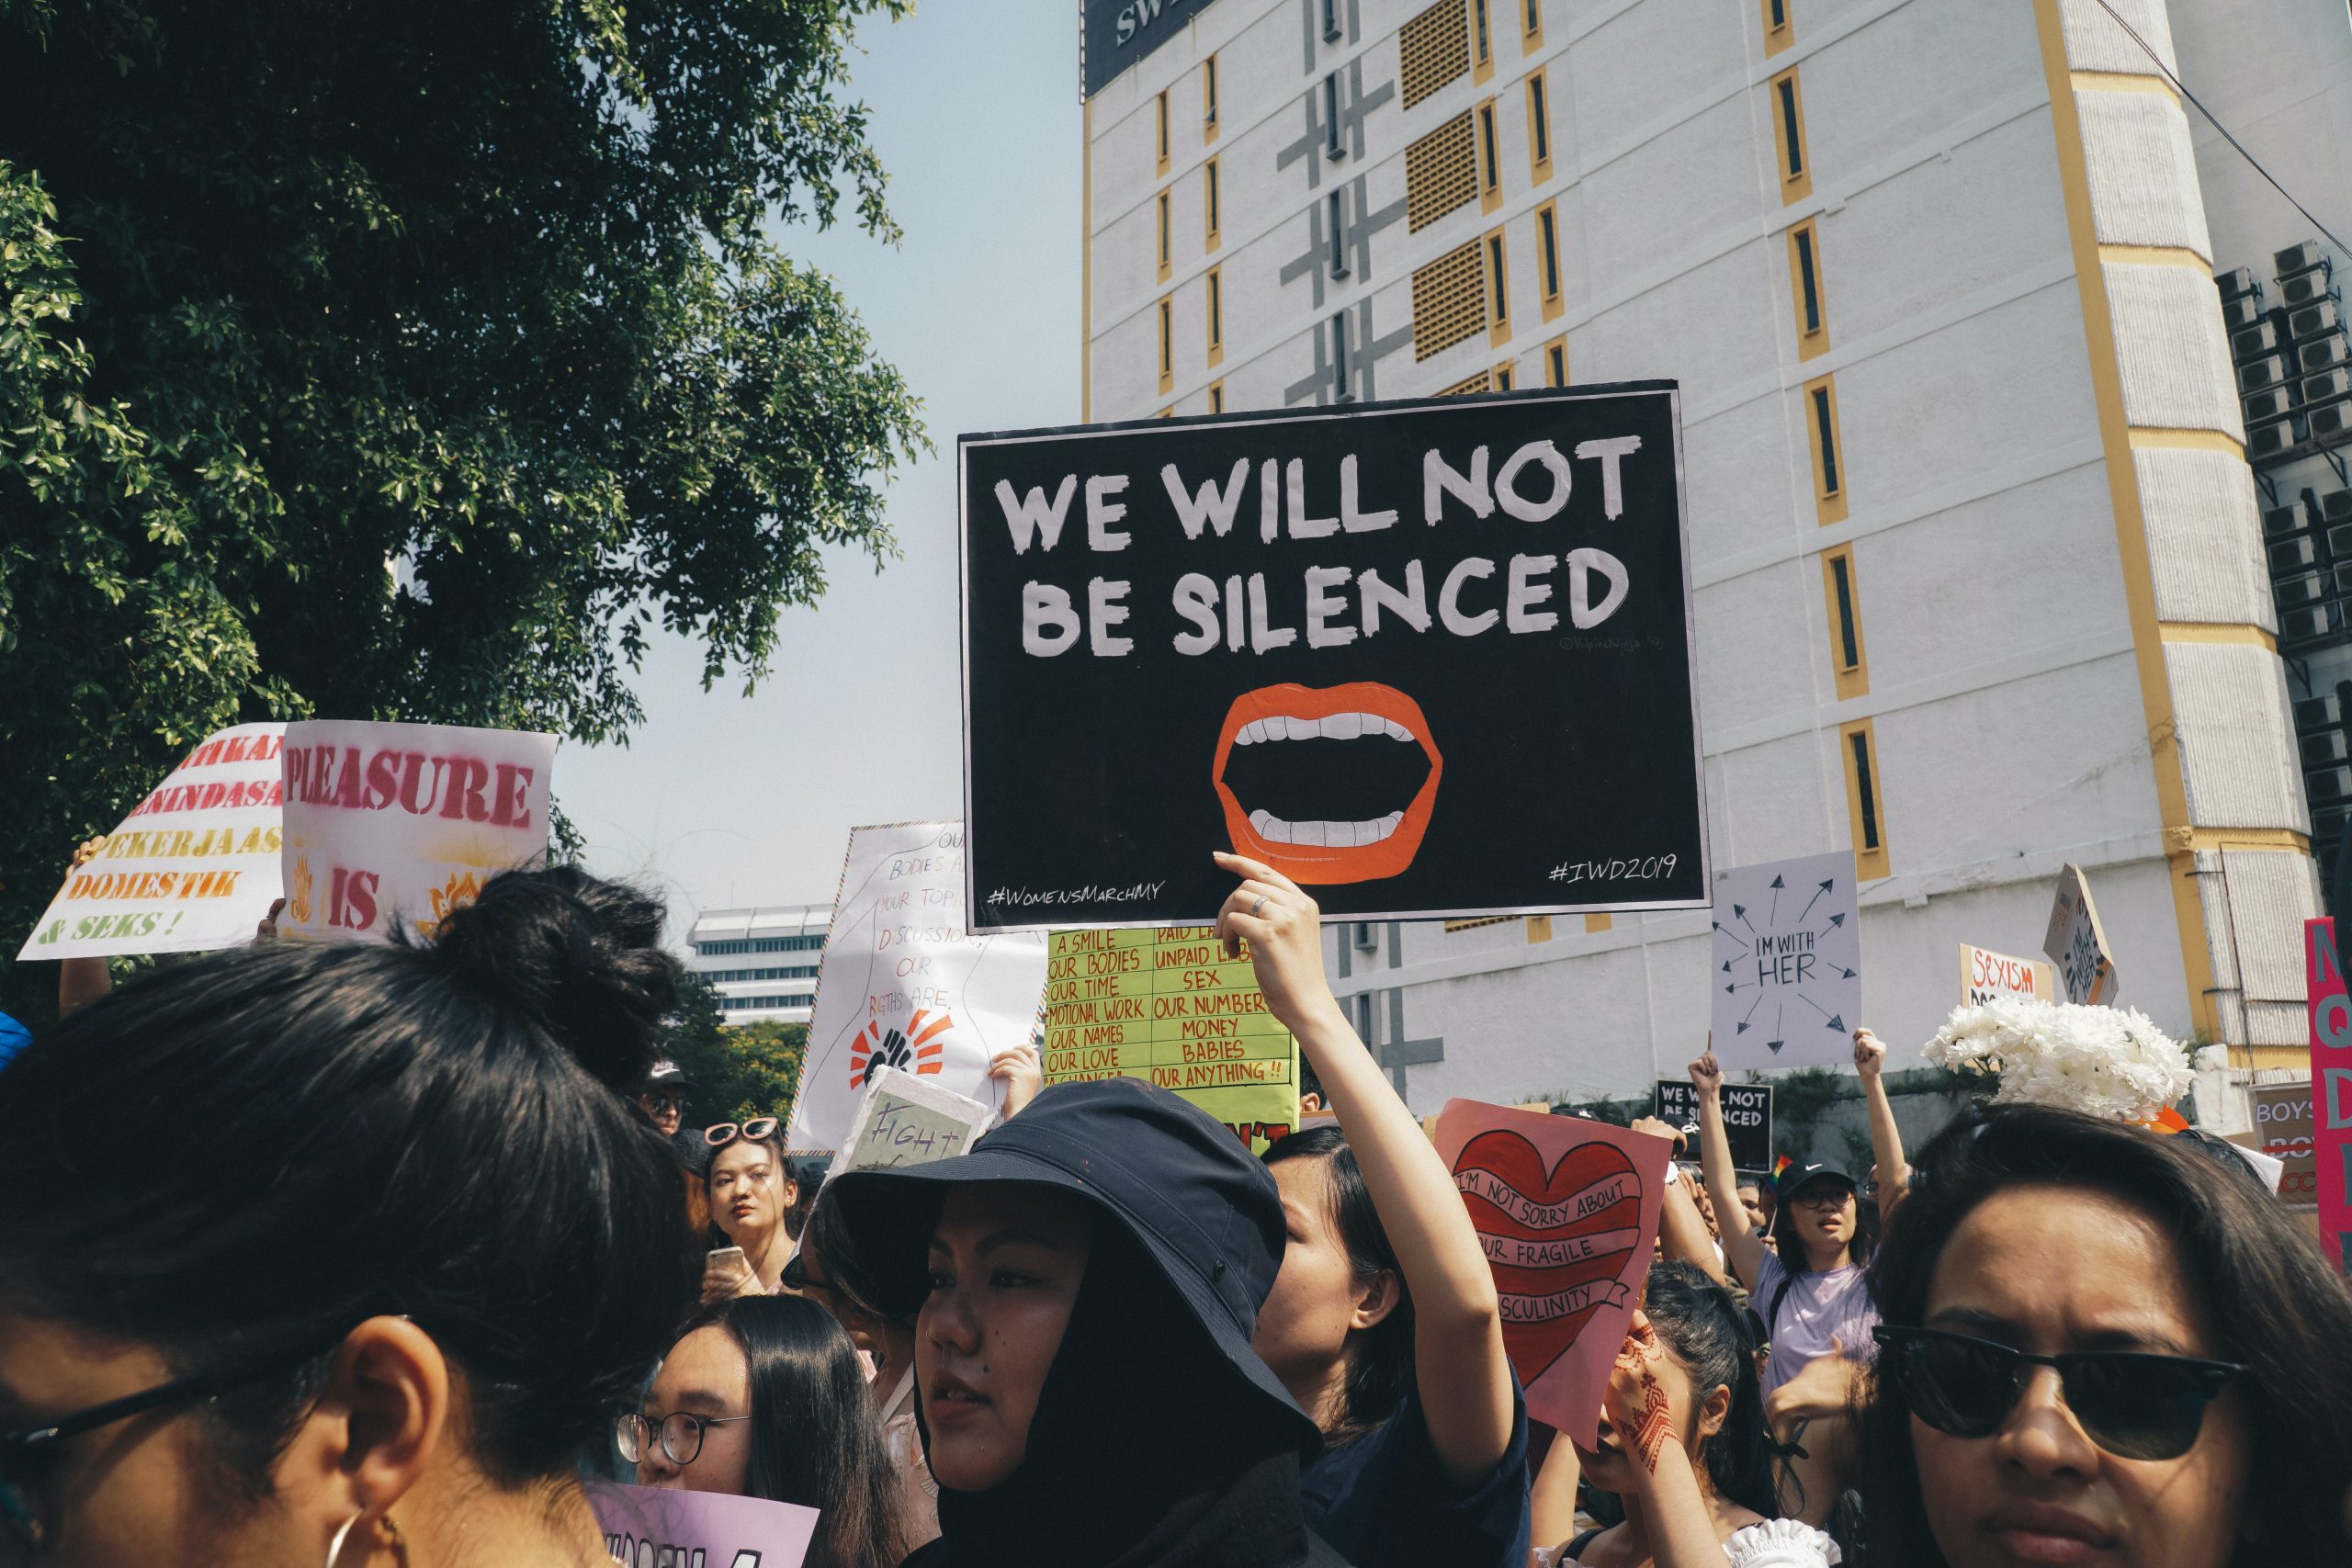 A sign held above a crowd reads "we will not be silenced" at a women's rights protest